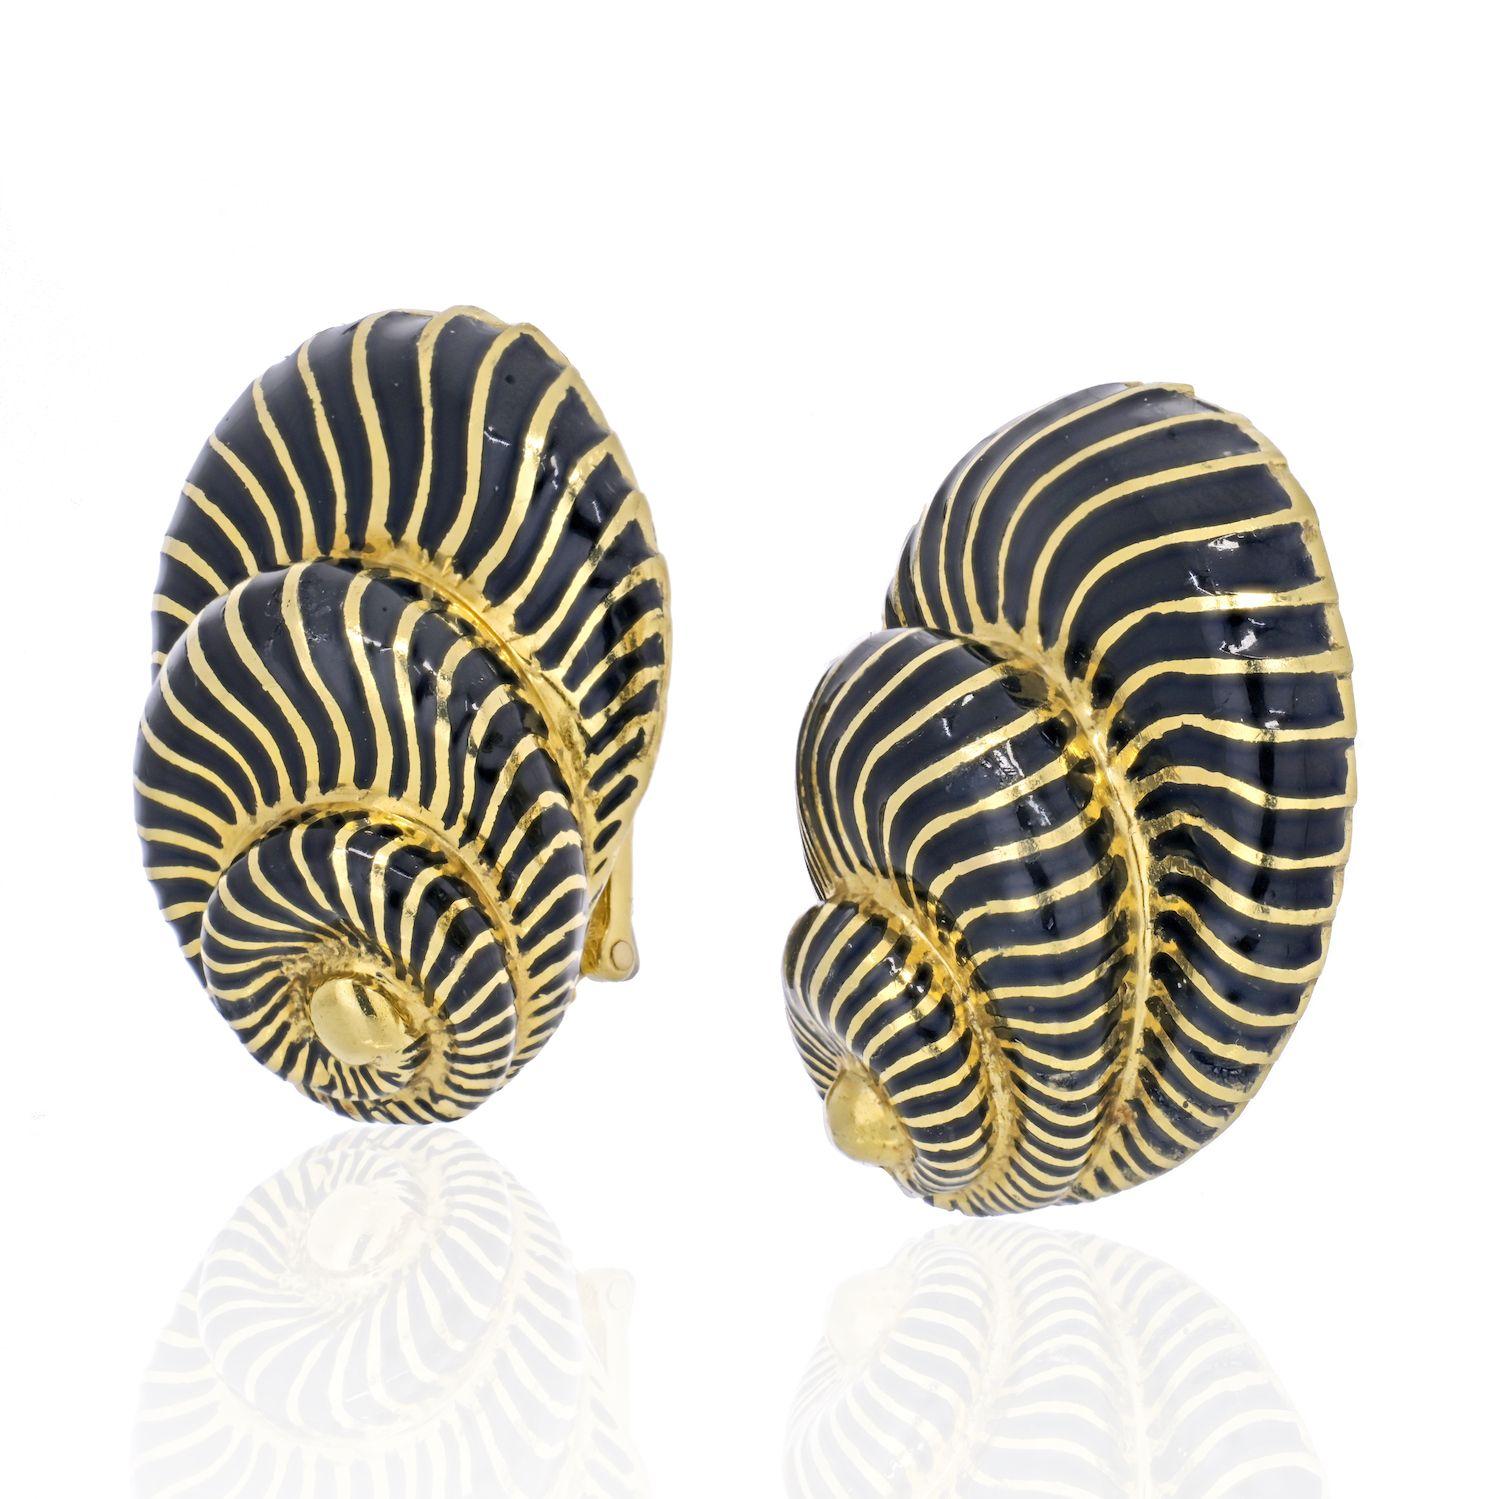 Bring her elements of the ocean with these glossy David Webb black and gold earrings. Fashioned in warm 18K gold, these sculpted seashell-shaped clip-ons have a soft glimmer. 
Measurements: earrings measure 30X 23.5mm.
